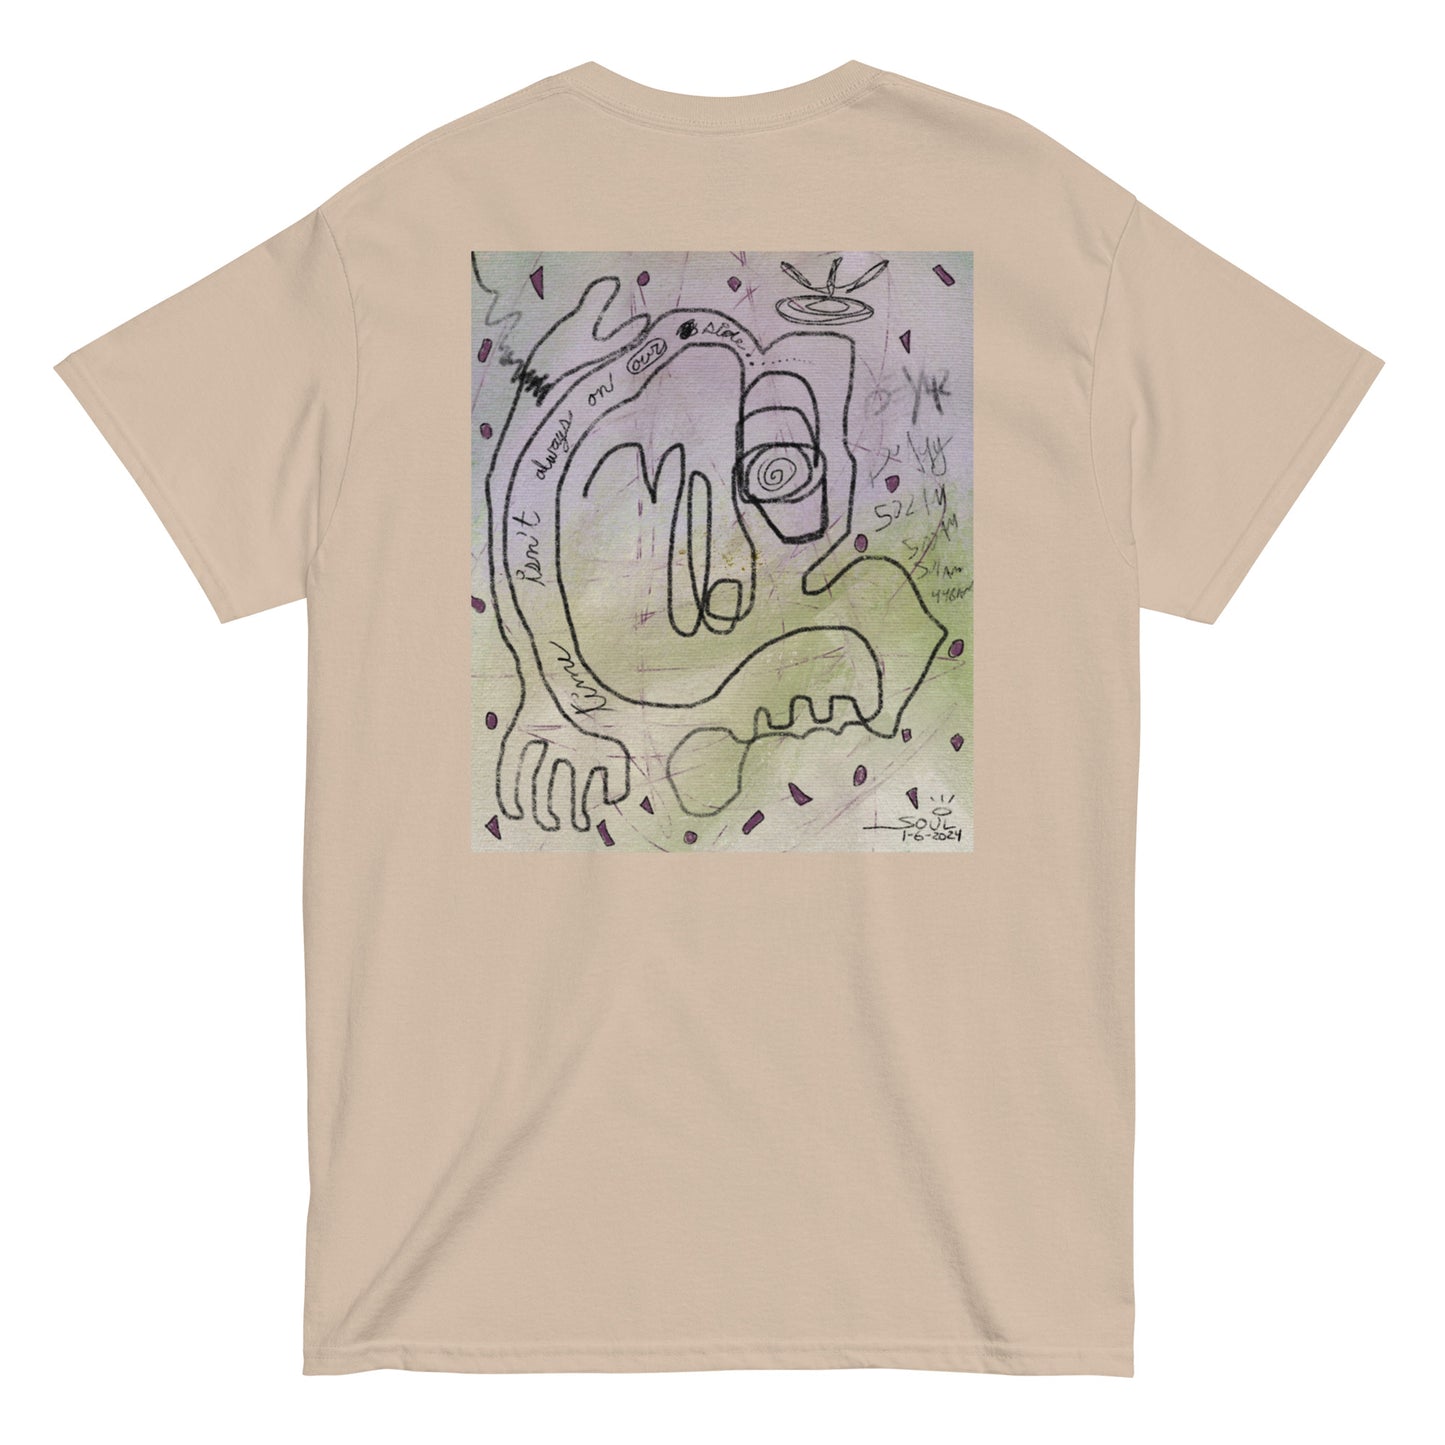 Dear Diary 4:48AM #37 - Collectible T-Shirt "Double-Sided Print - Based off the original 1/1 Solana NFT Print